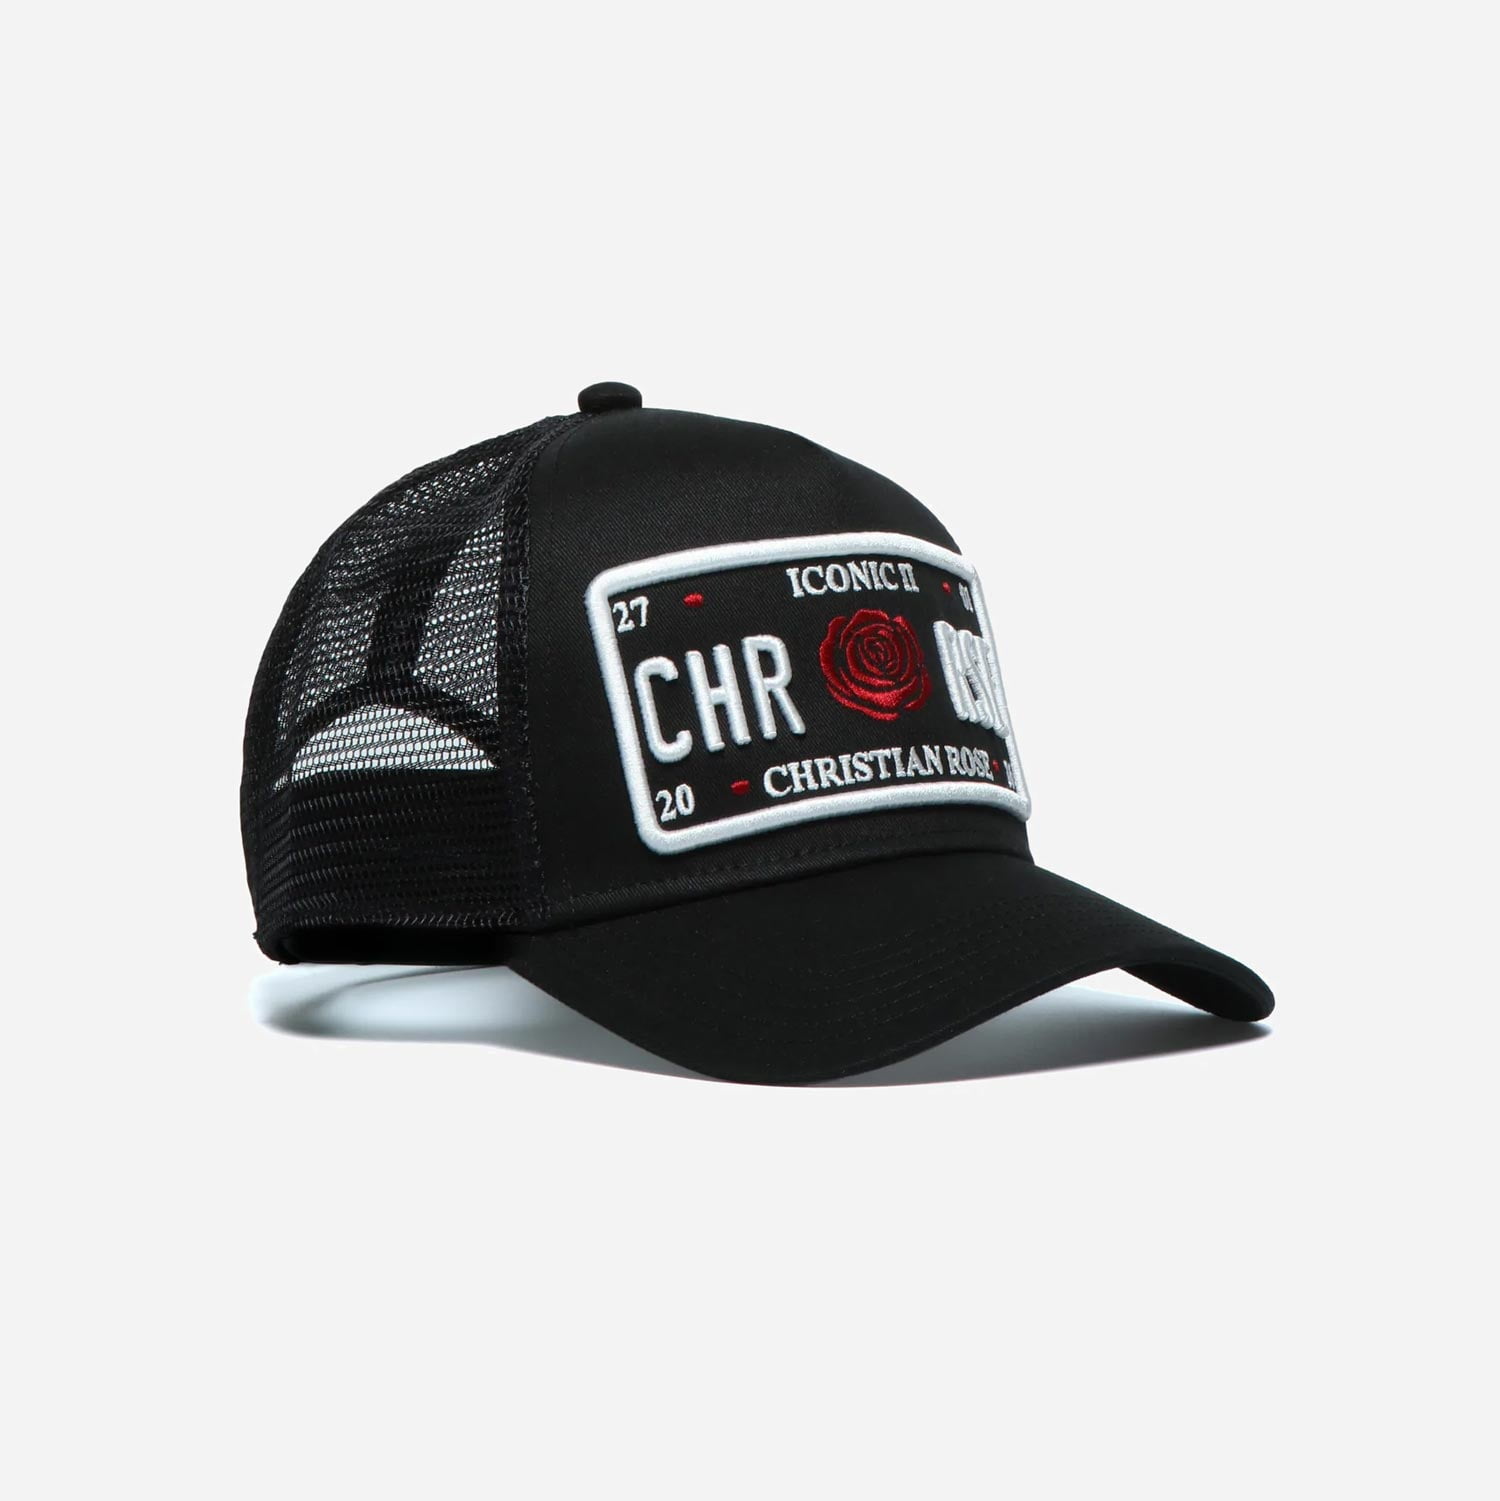 Christian Rose Iconic II Red Rose Plate Cap - Black/White/Red